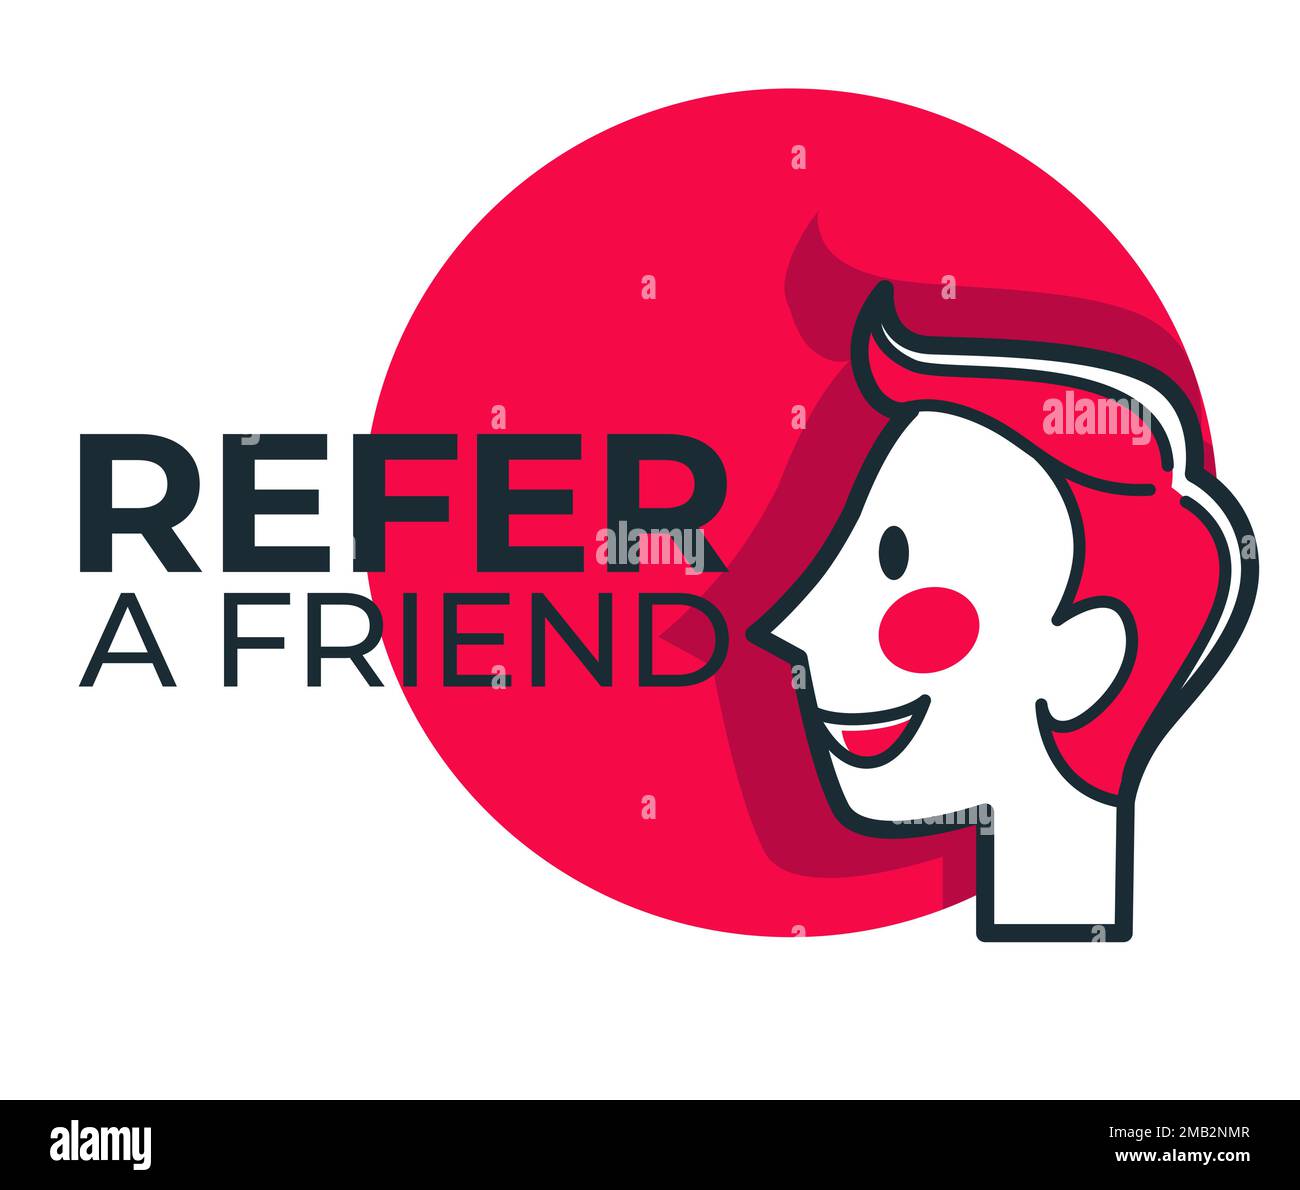 Refer friend isolated icon share information social media Stock Vector